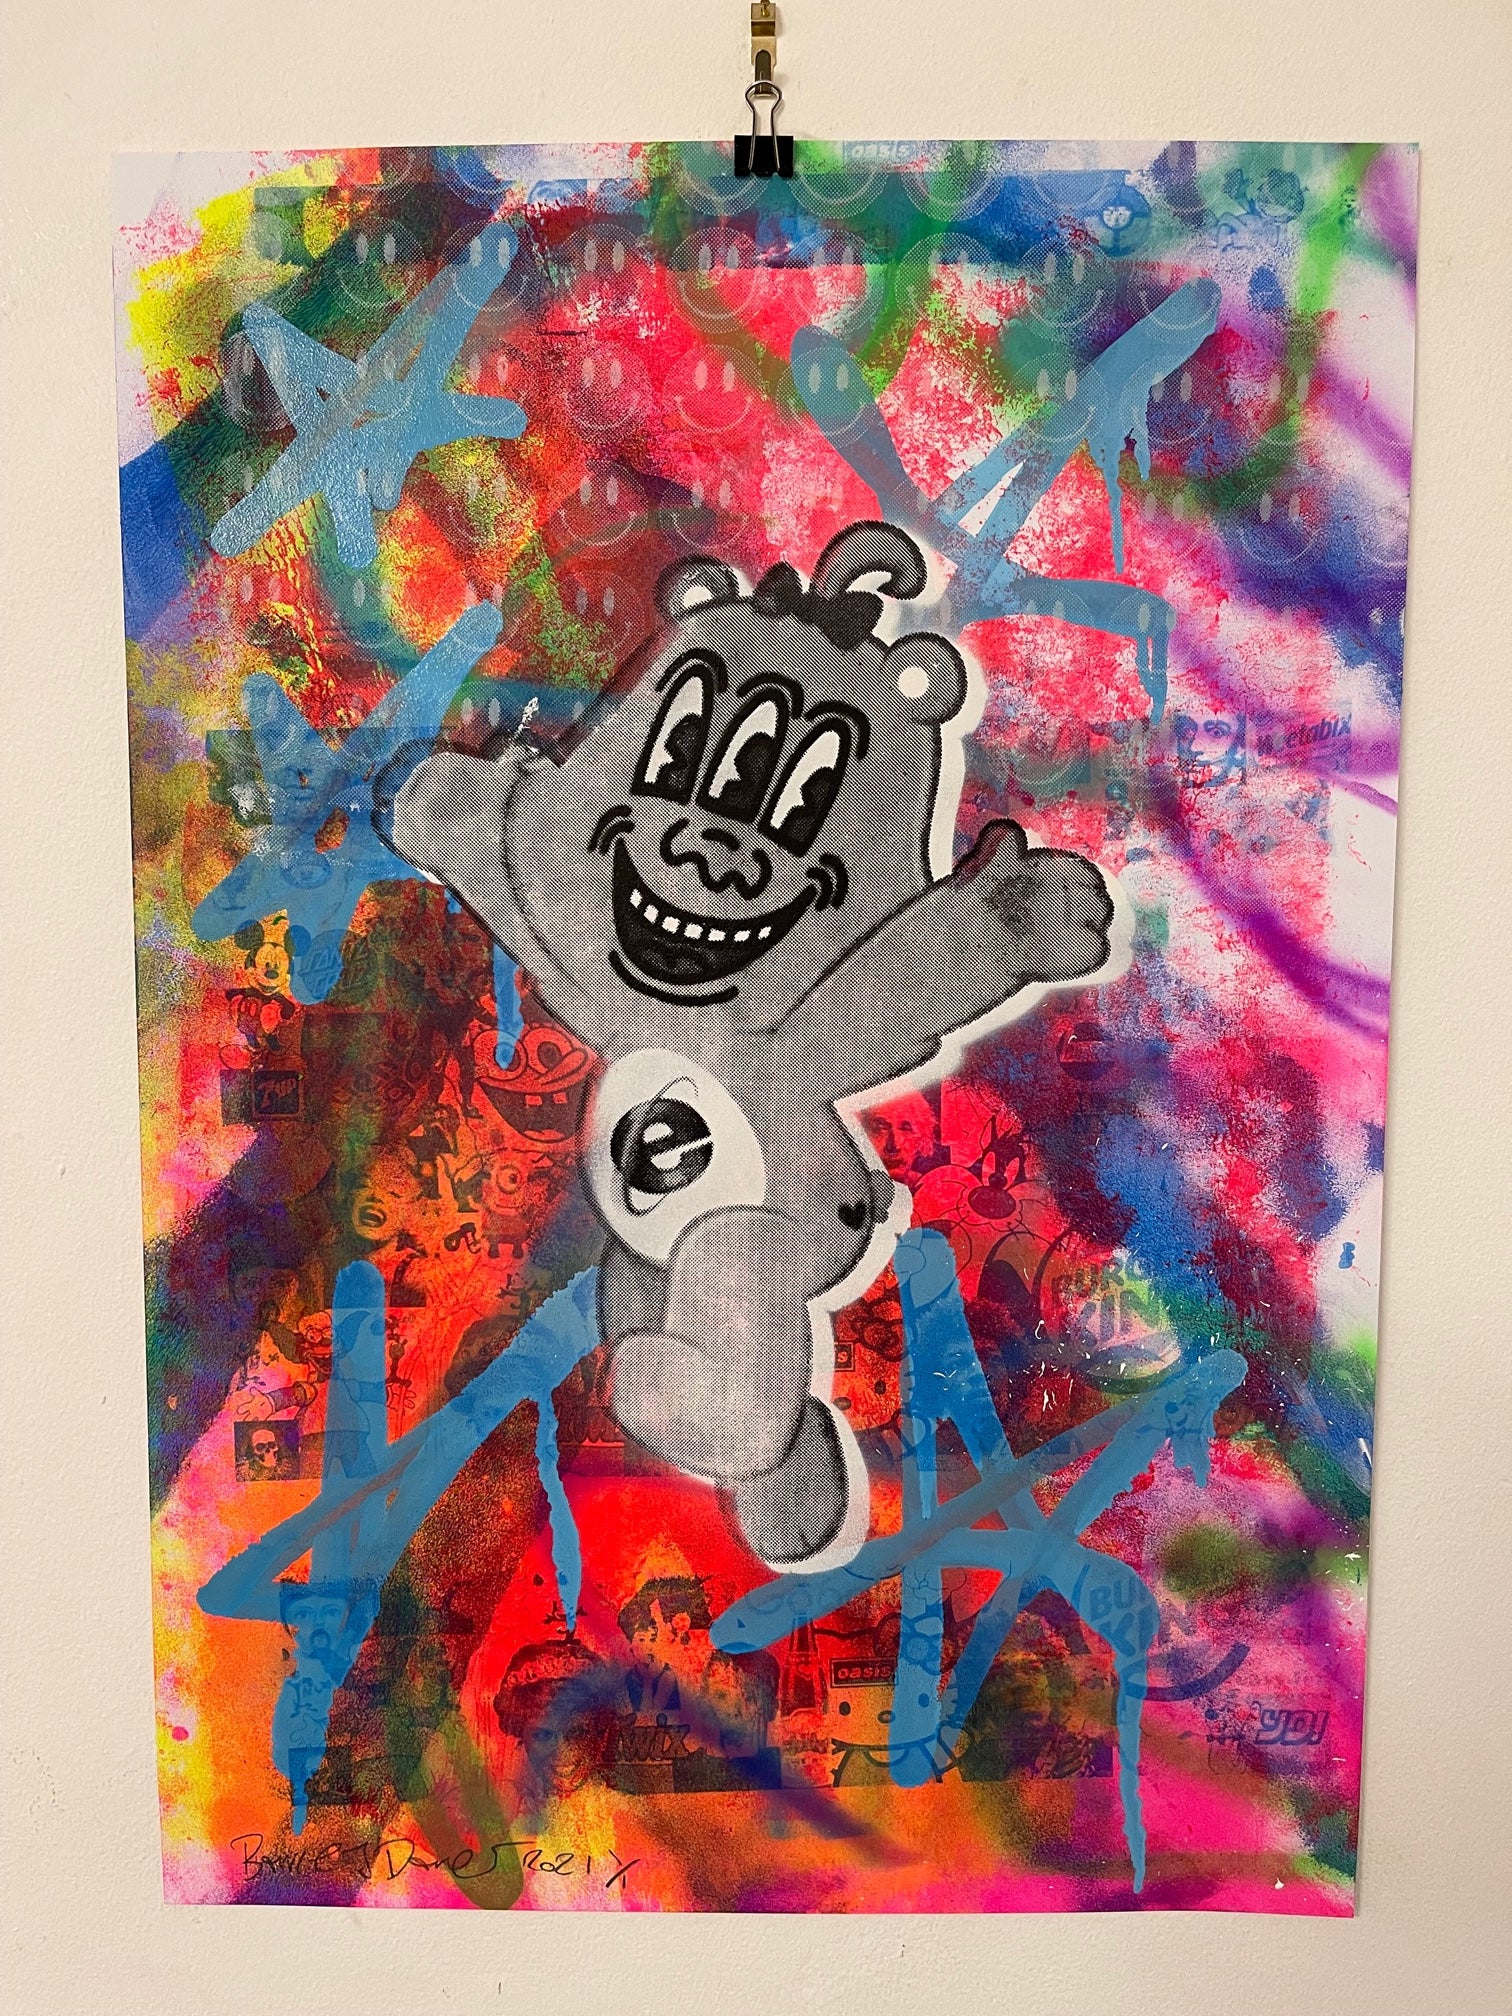 Street Wrong Bear Print by Barrie J Davies 2021 - unframed Silkscreen print on paper (hand finished) edition of 1/1 - A2 size 42cm x 59.4cm.